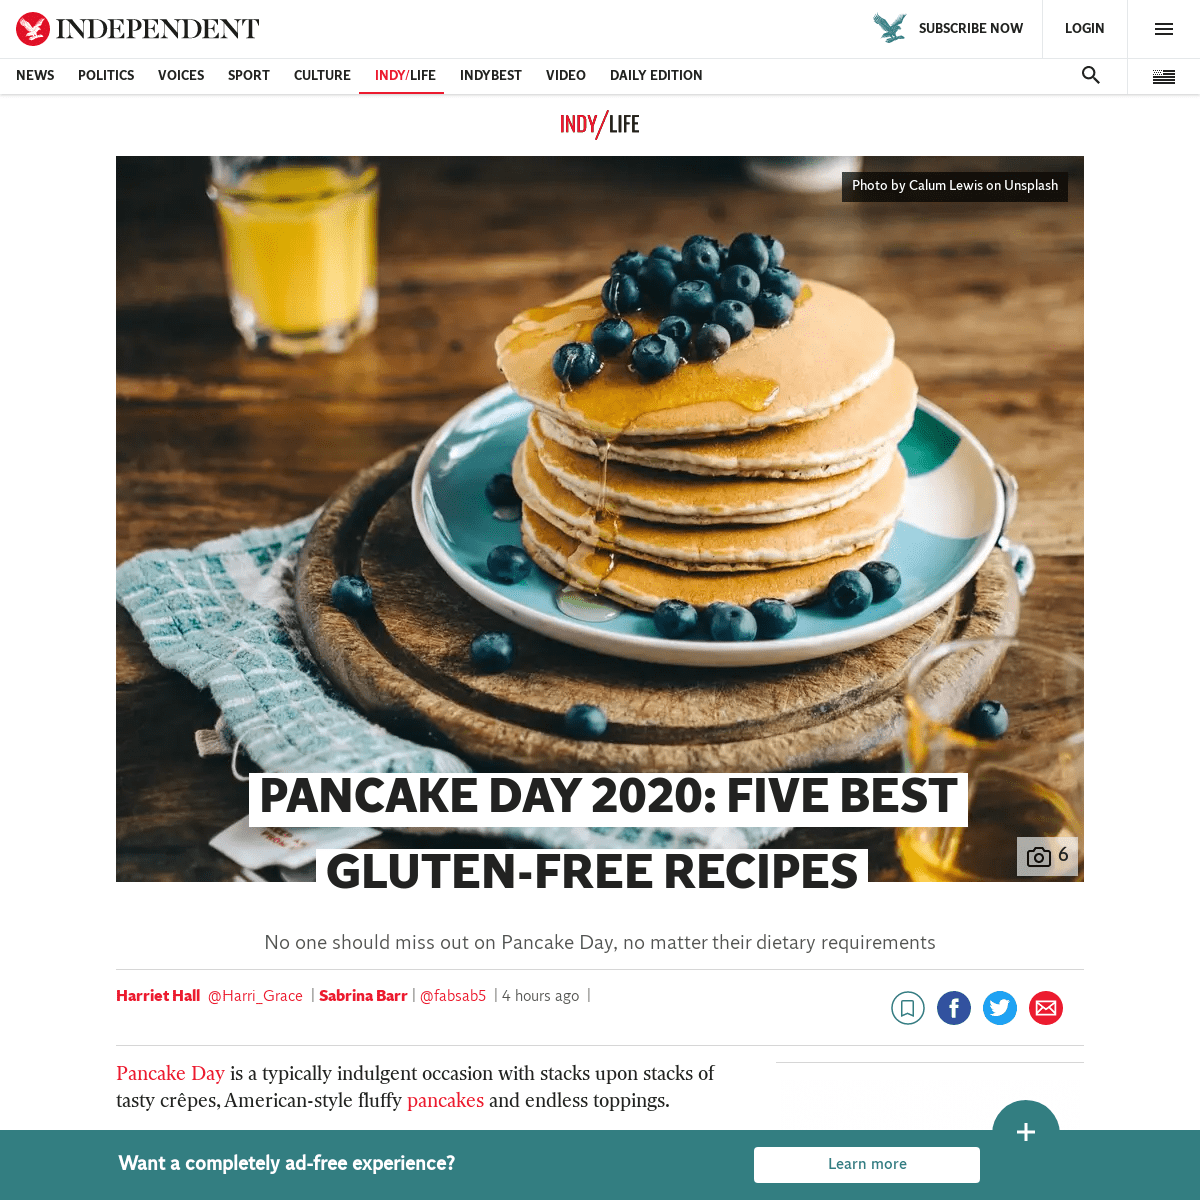 A complete backup of www.independent.co.uk/life-style/food-and-drink/pancake-day-recipe-gluten-free-coeliac-disease-rhiannon-lam